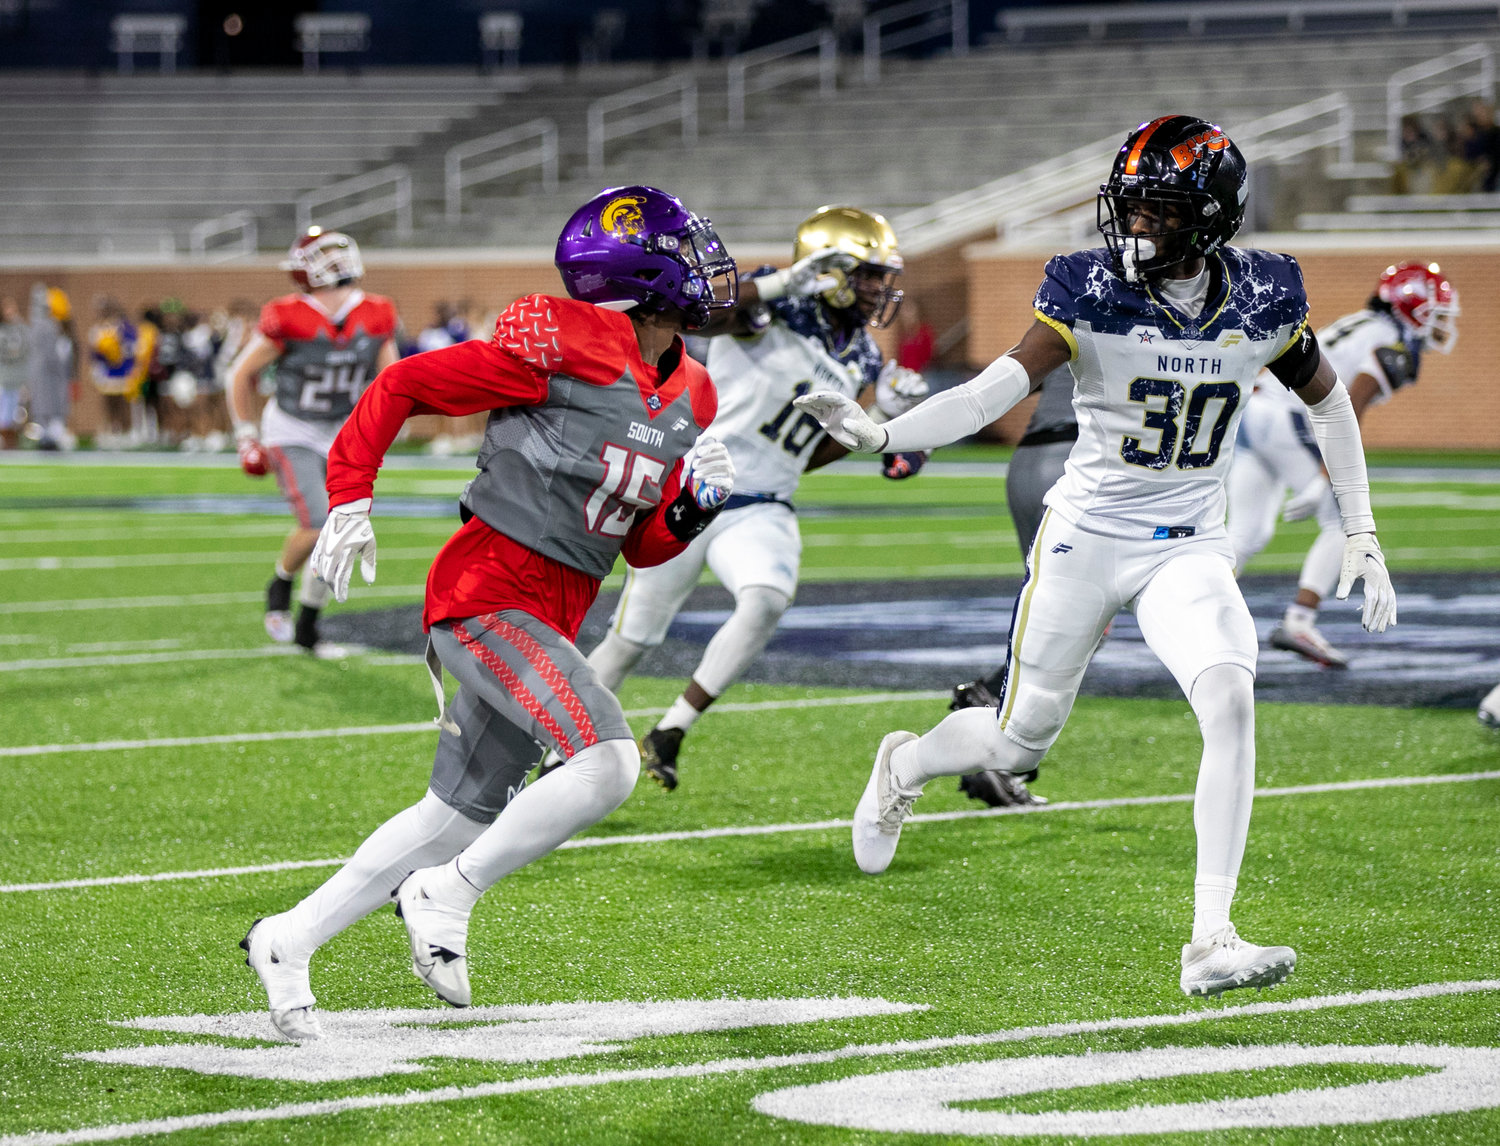 Daphne’s Stephon Blackshear searches for the ball on a first-half punt coverage Friday night at Hancock Whitney Stadium at the AHSAA North-South All-Star Football Classic. Blackshear caught one pass in the 42-7 win.